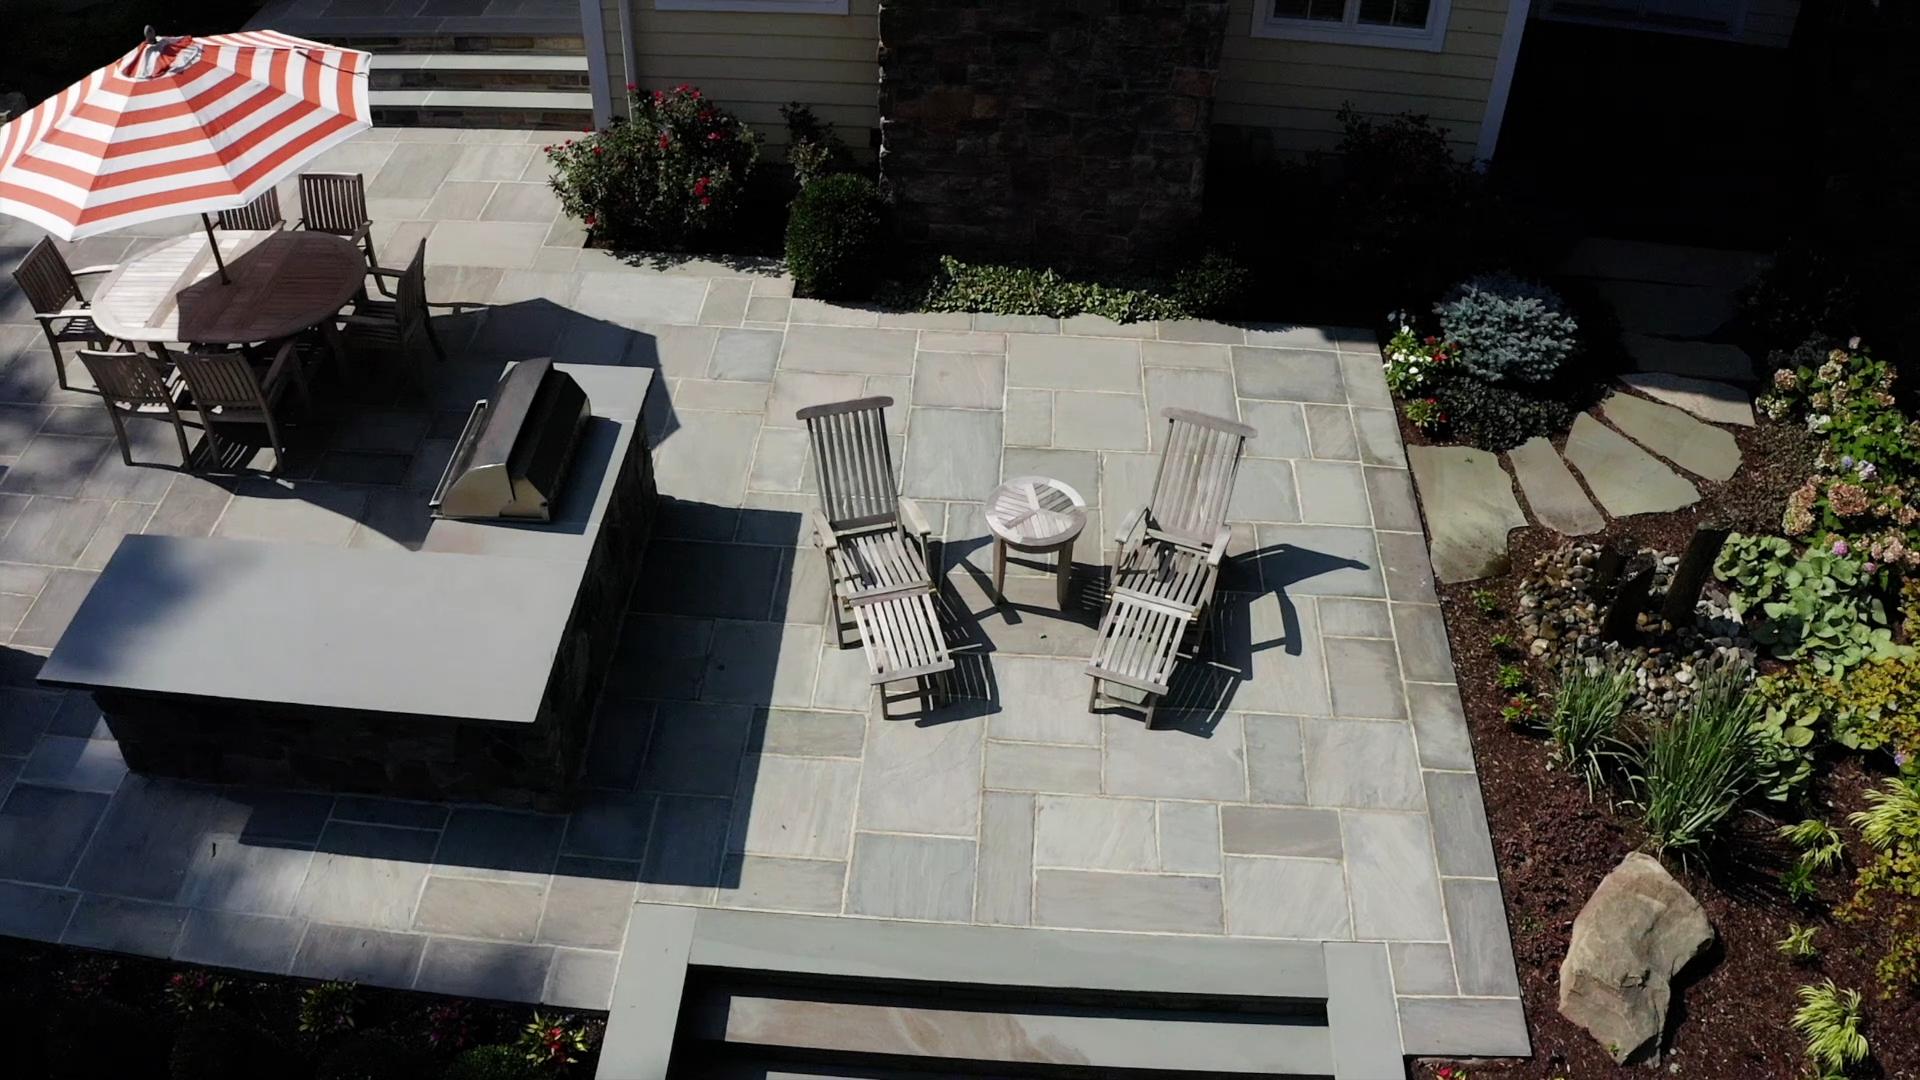 Stunning paver patio with outdoor kitchen in Wyckoff, NJ